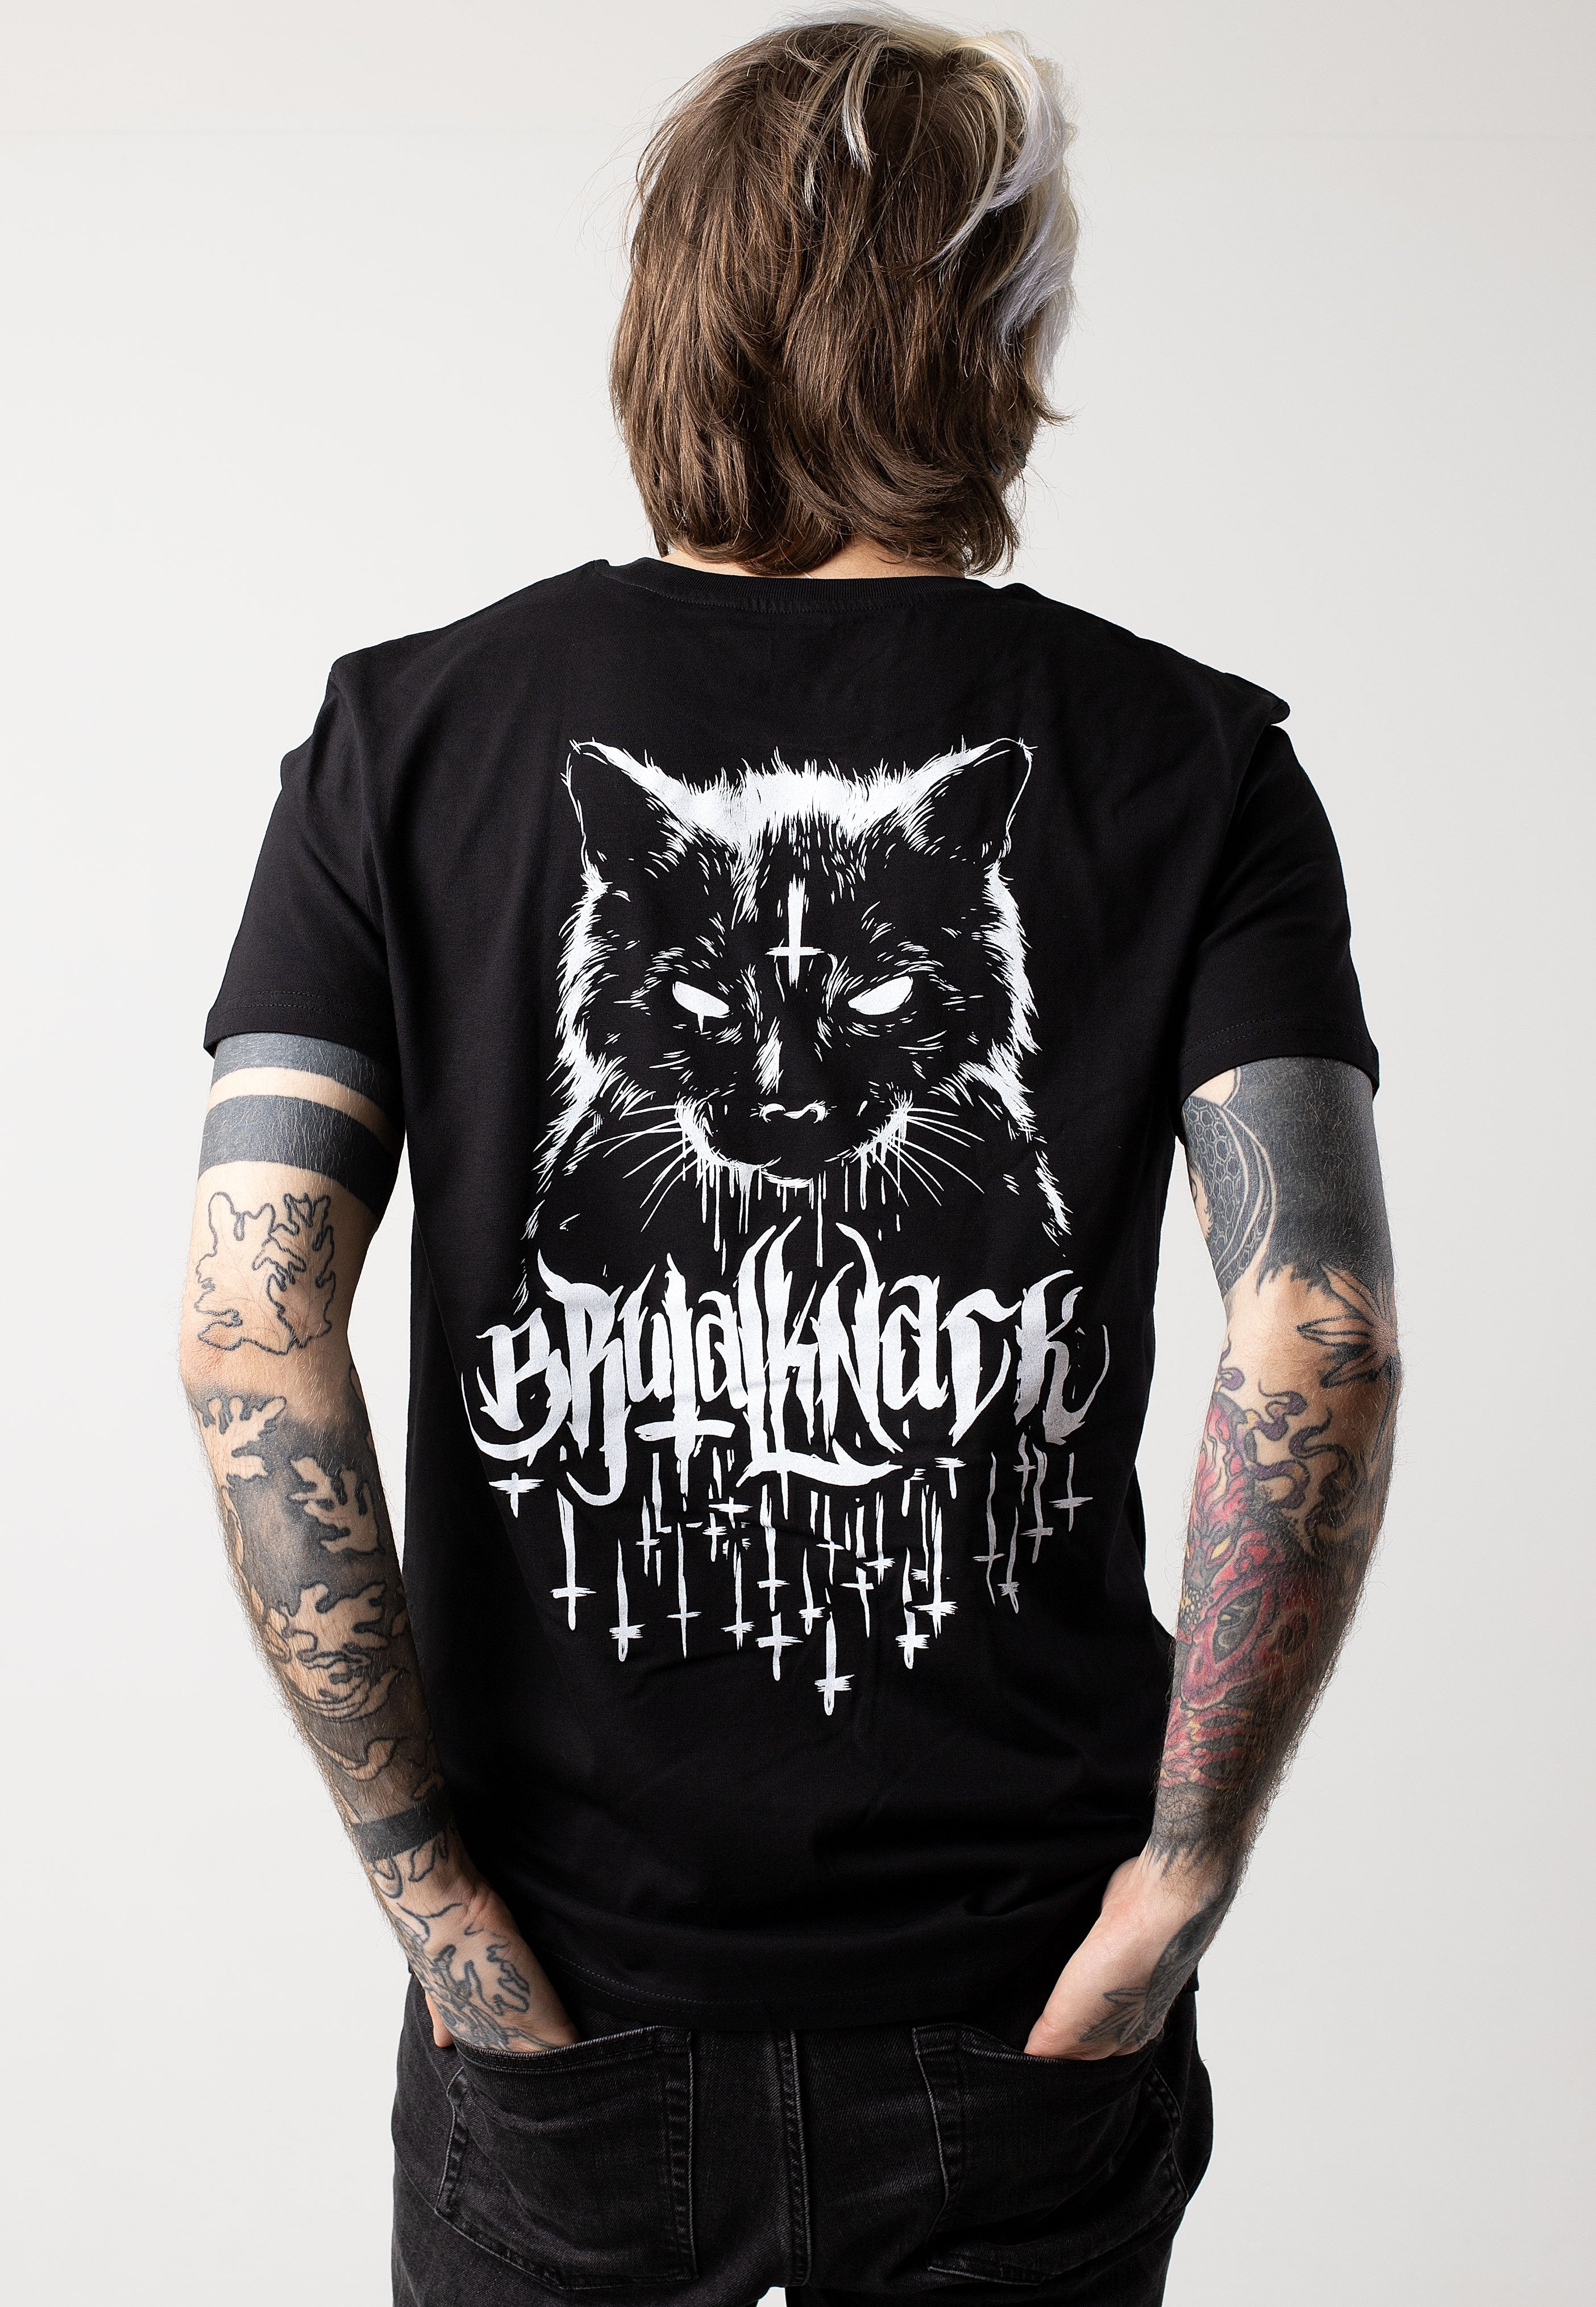 Brutal Knack - The Cat from Hell Black - T-Shirt